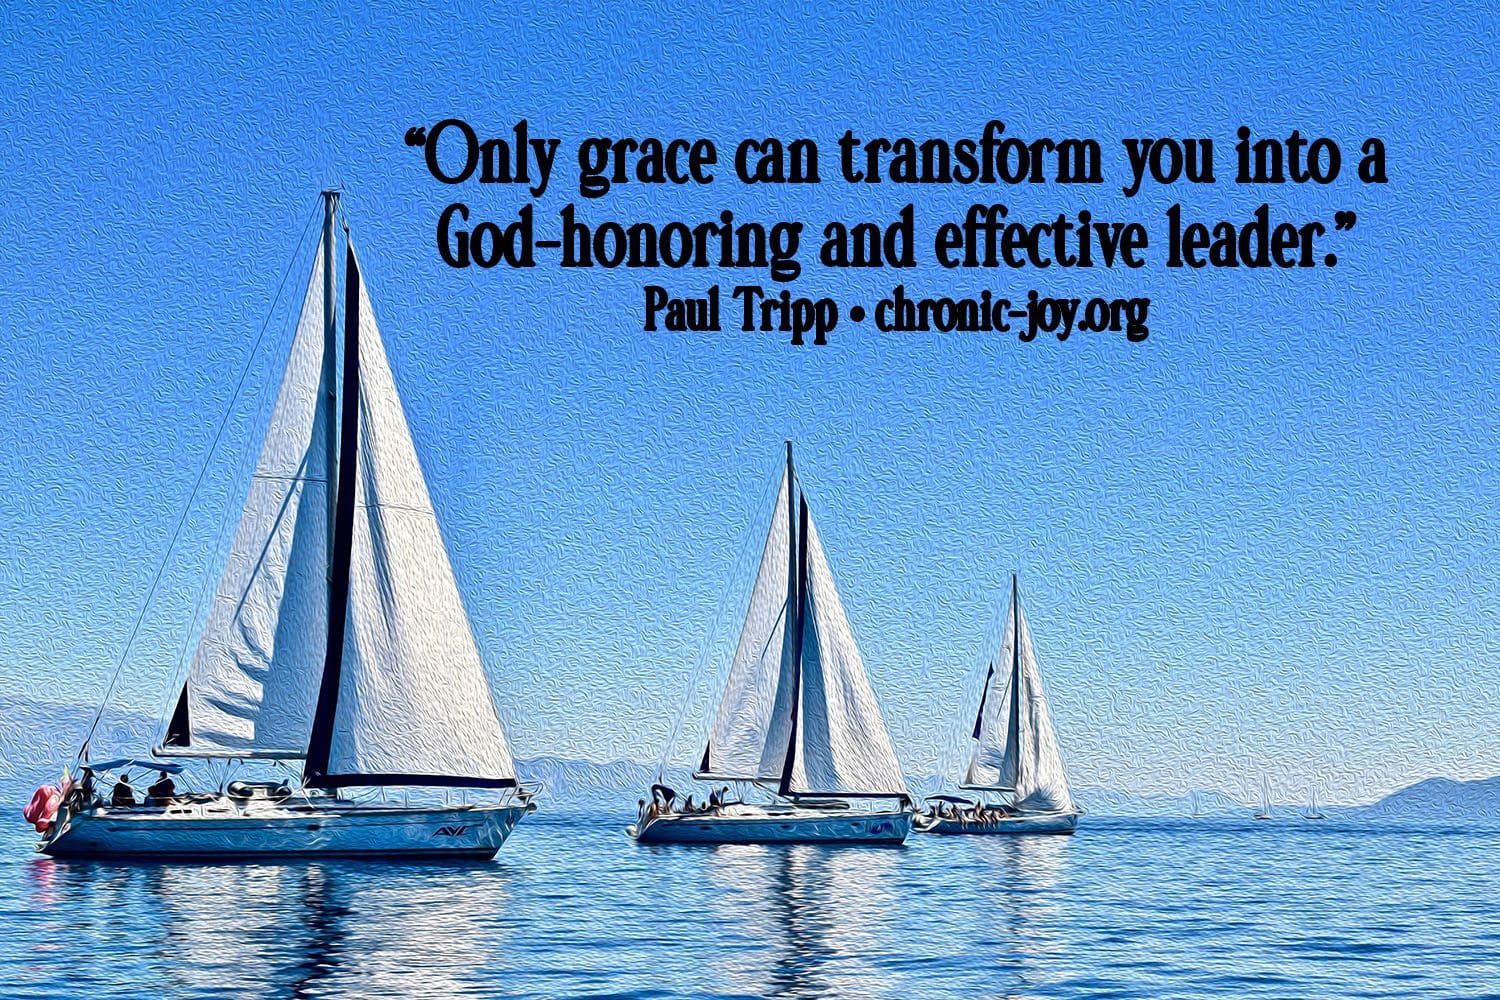 "Only grace can transform you into a God-honoring and effective leader." Paul Tripp